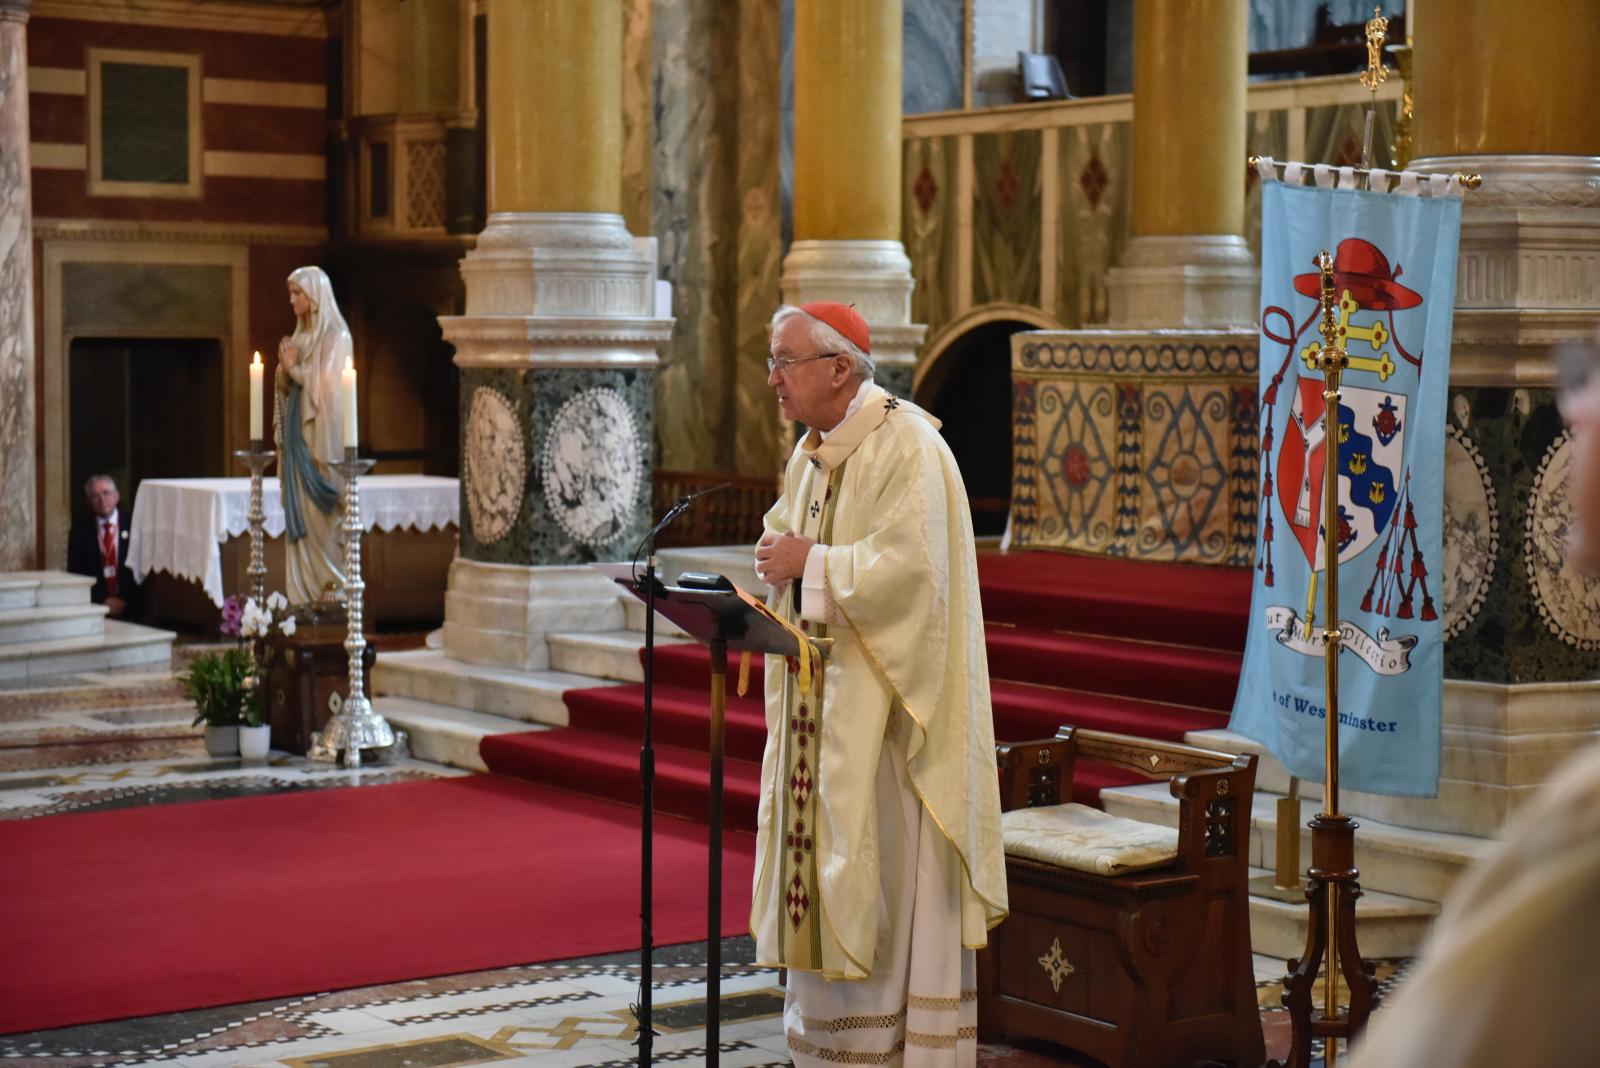 Cardinal's homily for the Virtual Lourdes Pilgrimage